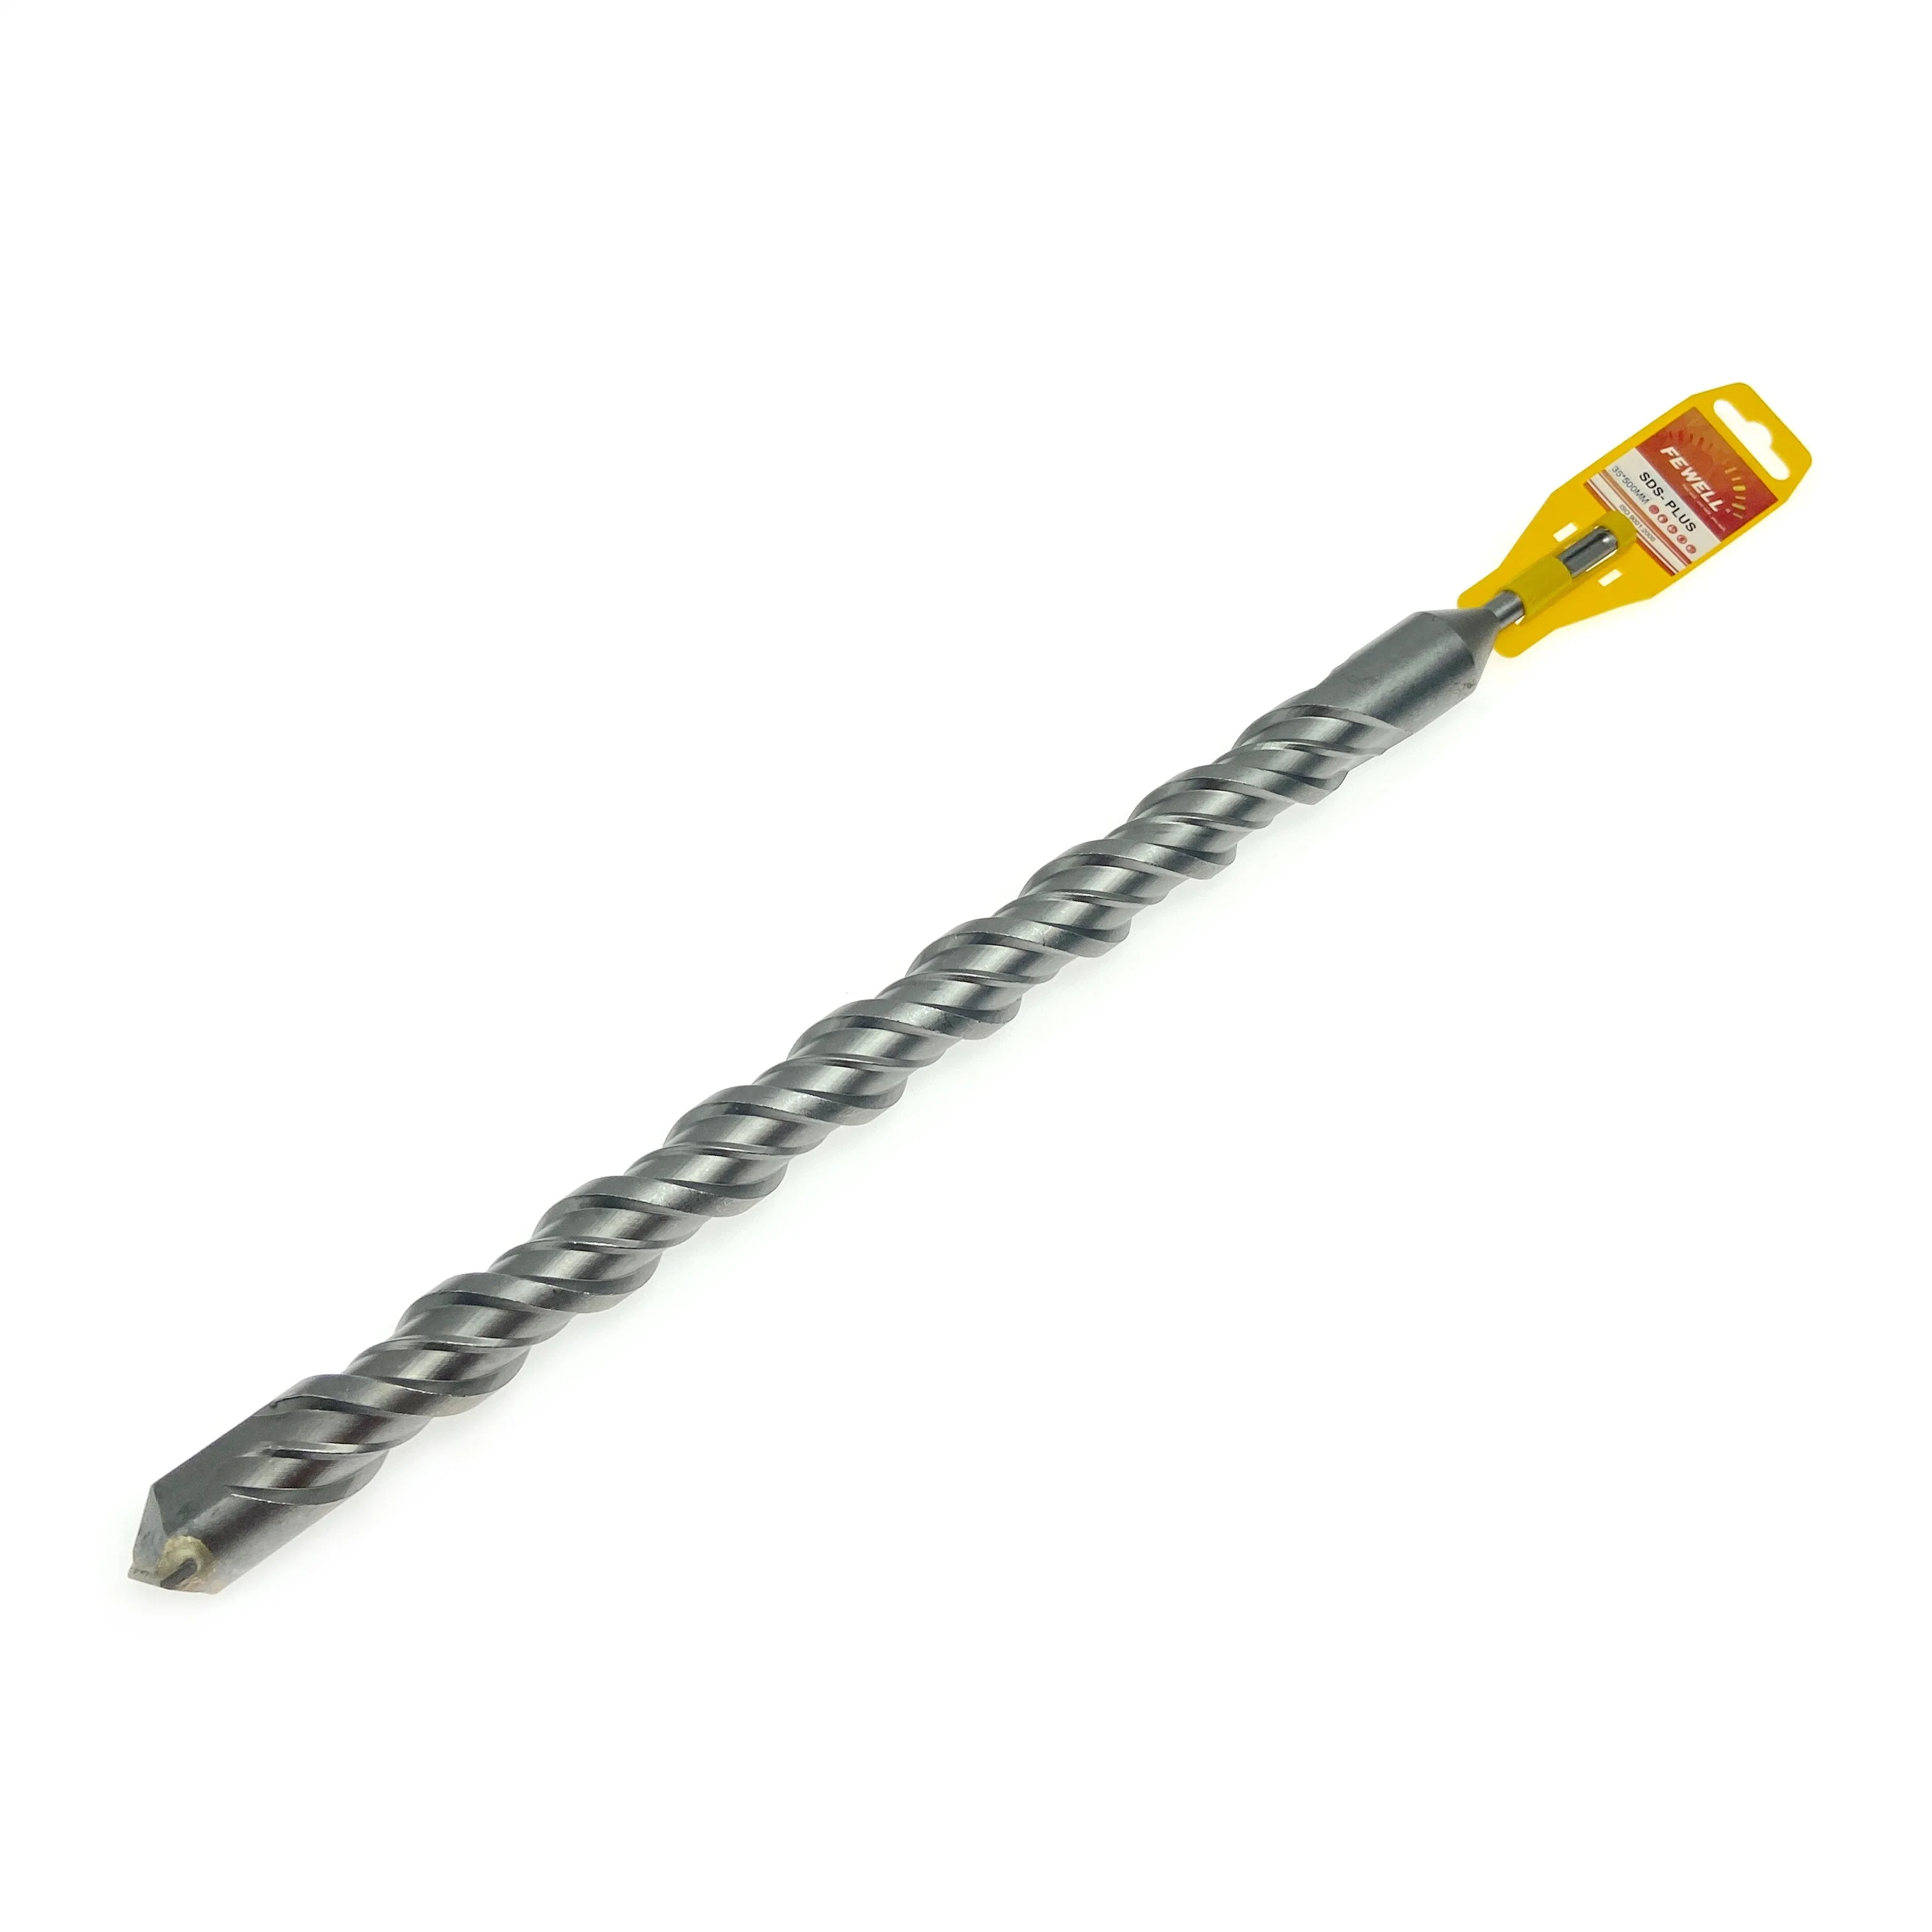 SDS Plus Carbide Single Flat Tip 35*500 Double Flute Electric Hammer Drill Bit for Concrete Wall Masonry Hard Stone Granite